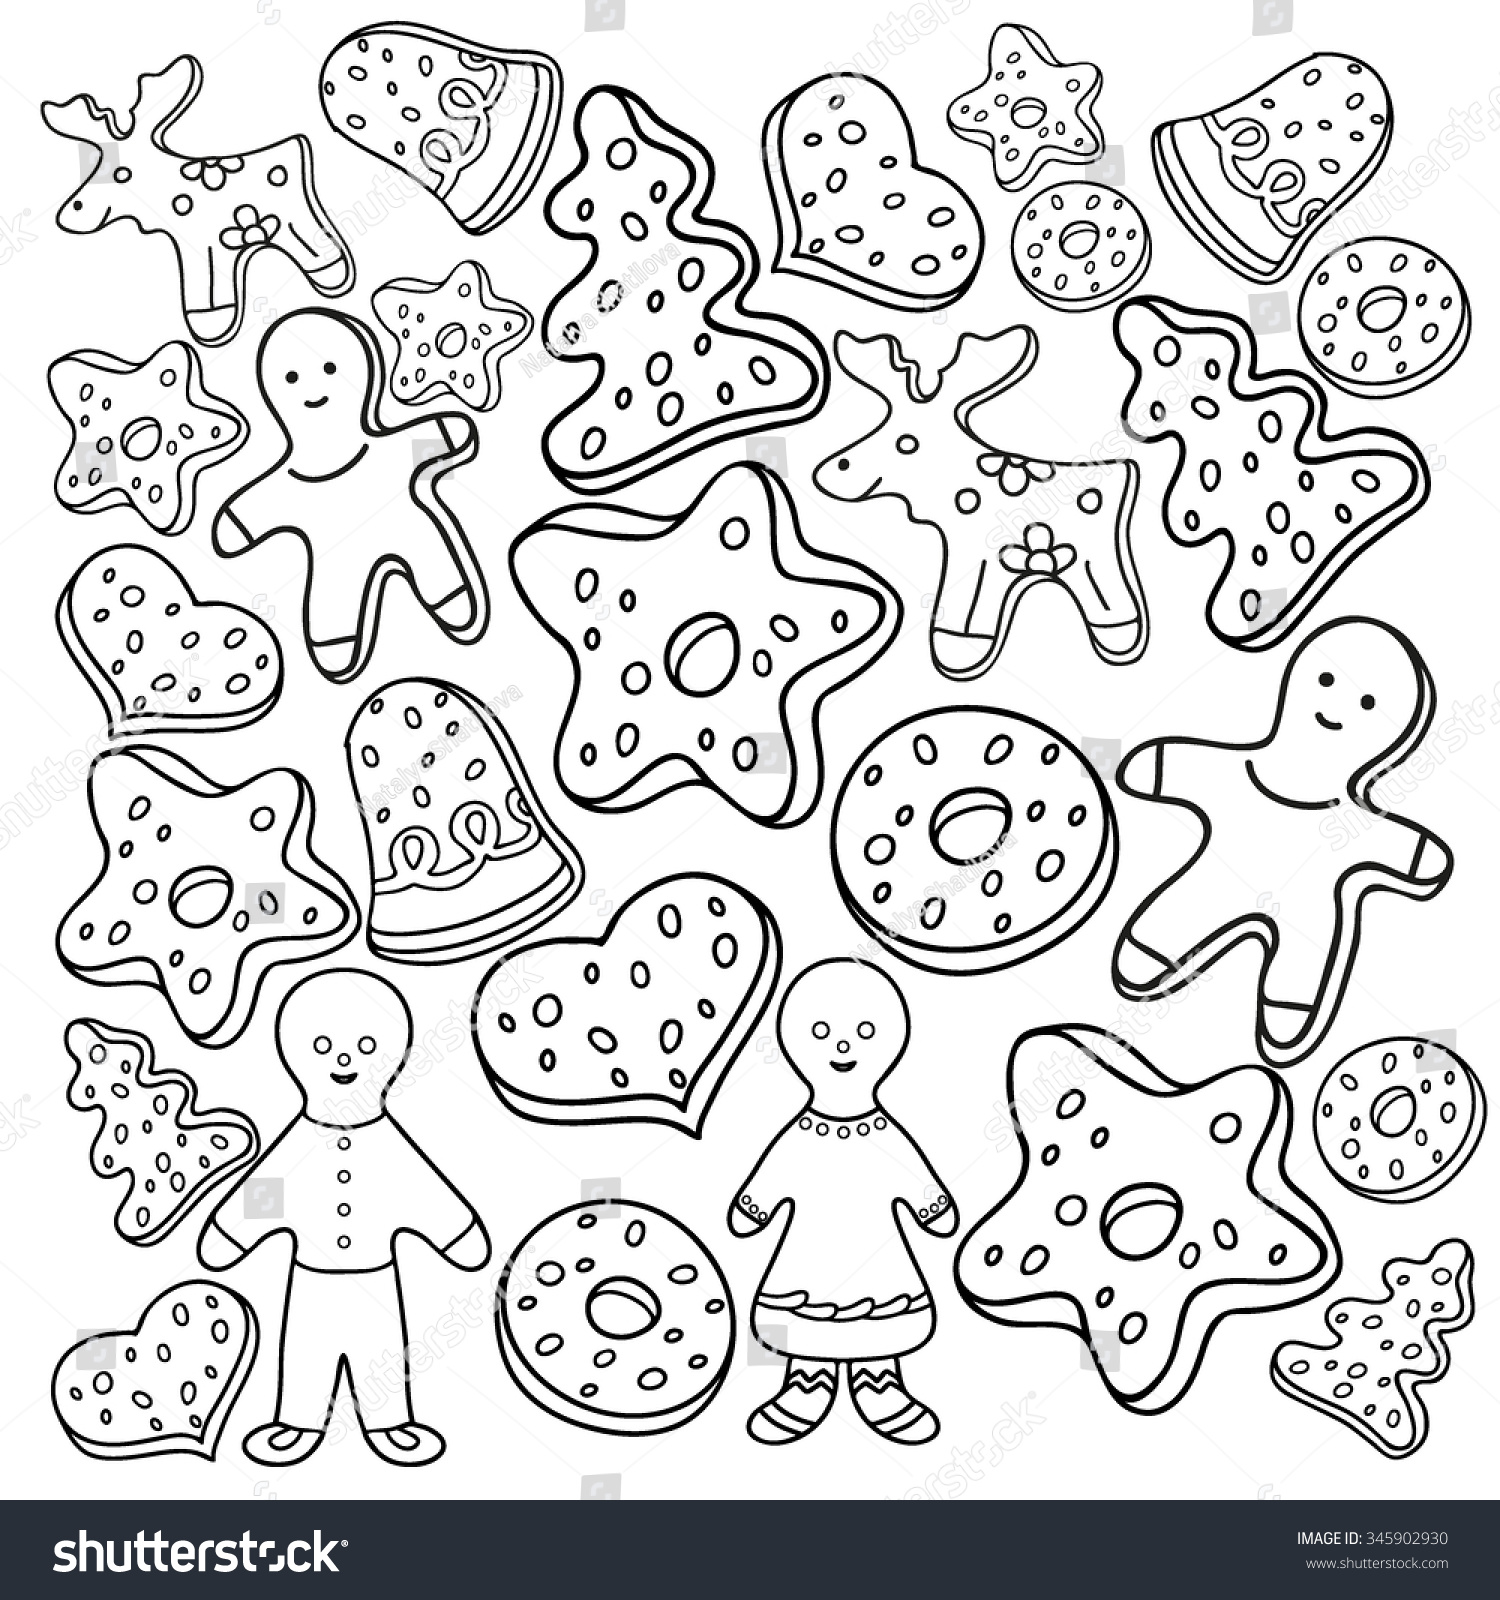 357 Simple Coloring Pages Of Christmas Cookies with Printable